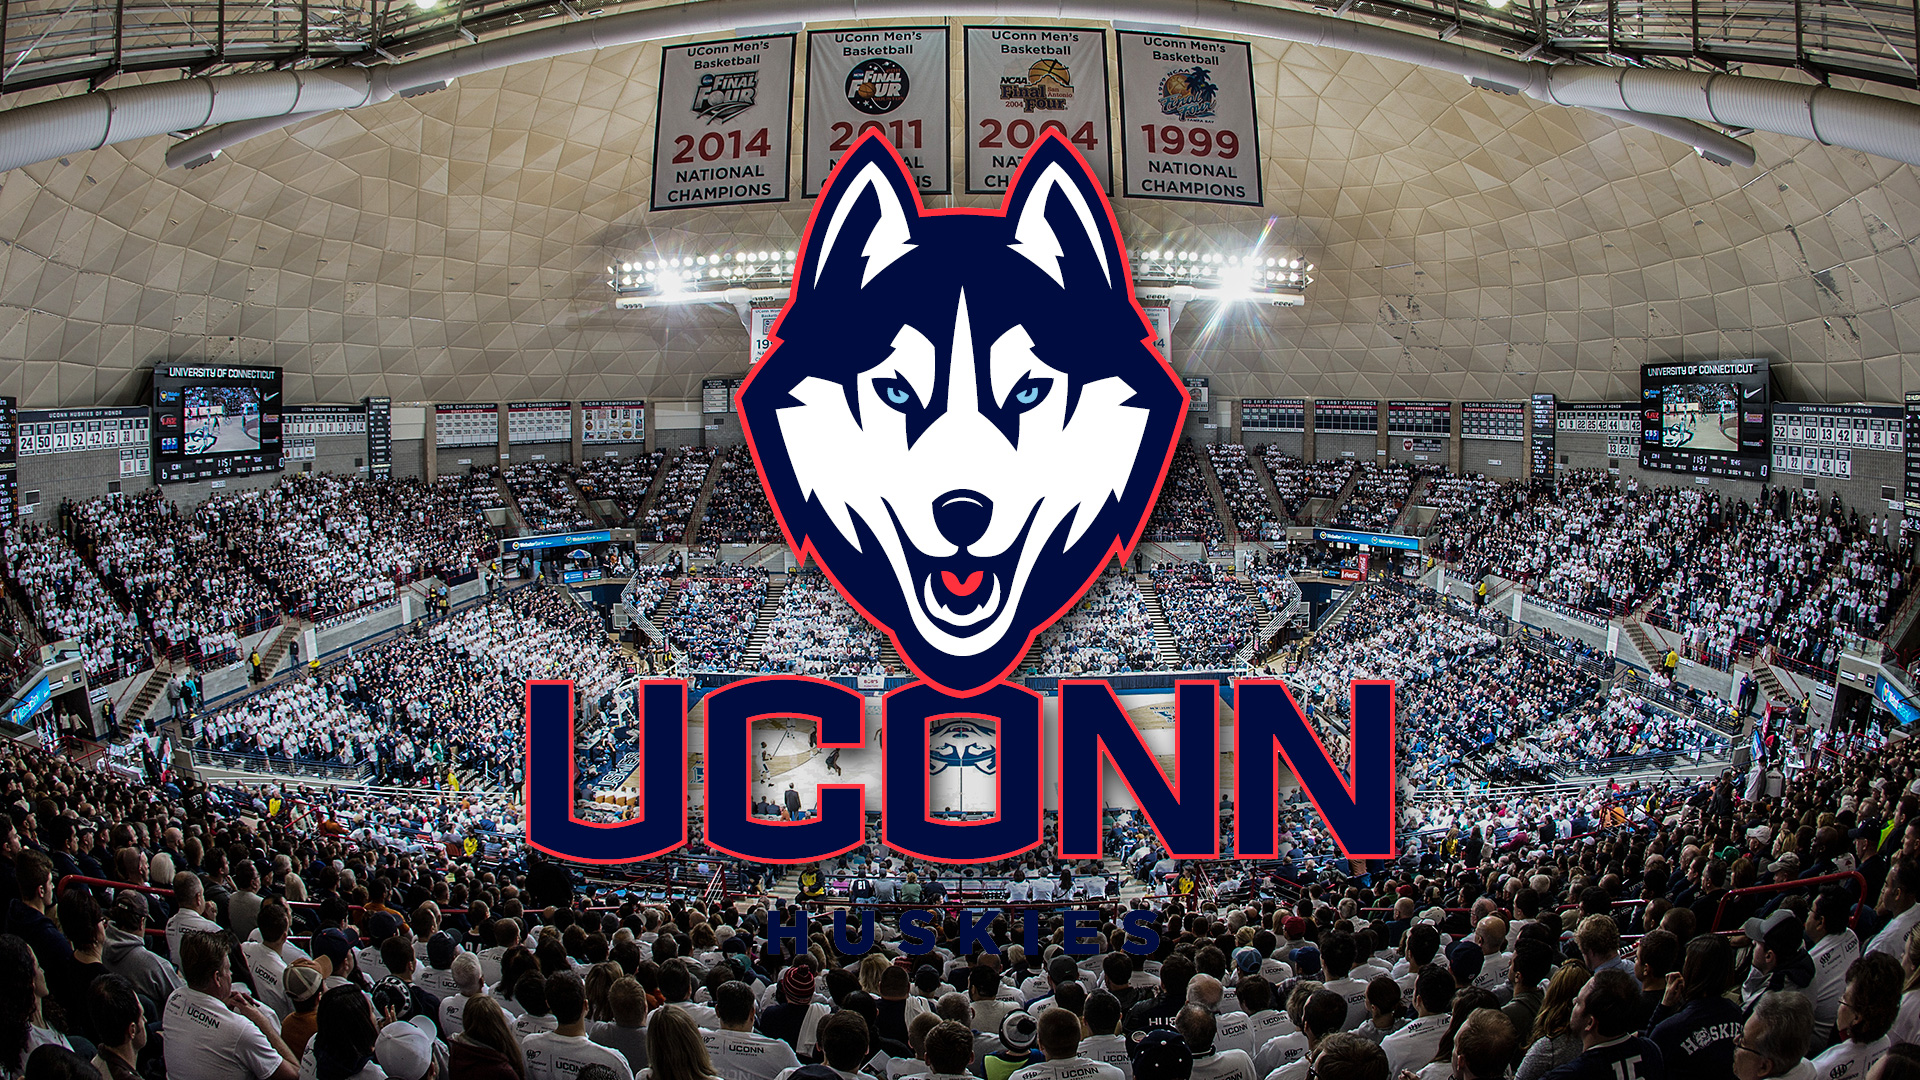 Uconn on verge of return to big east per reports football future uncertain sporting news